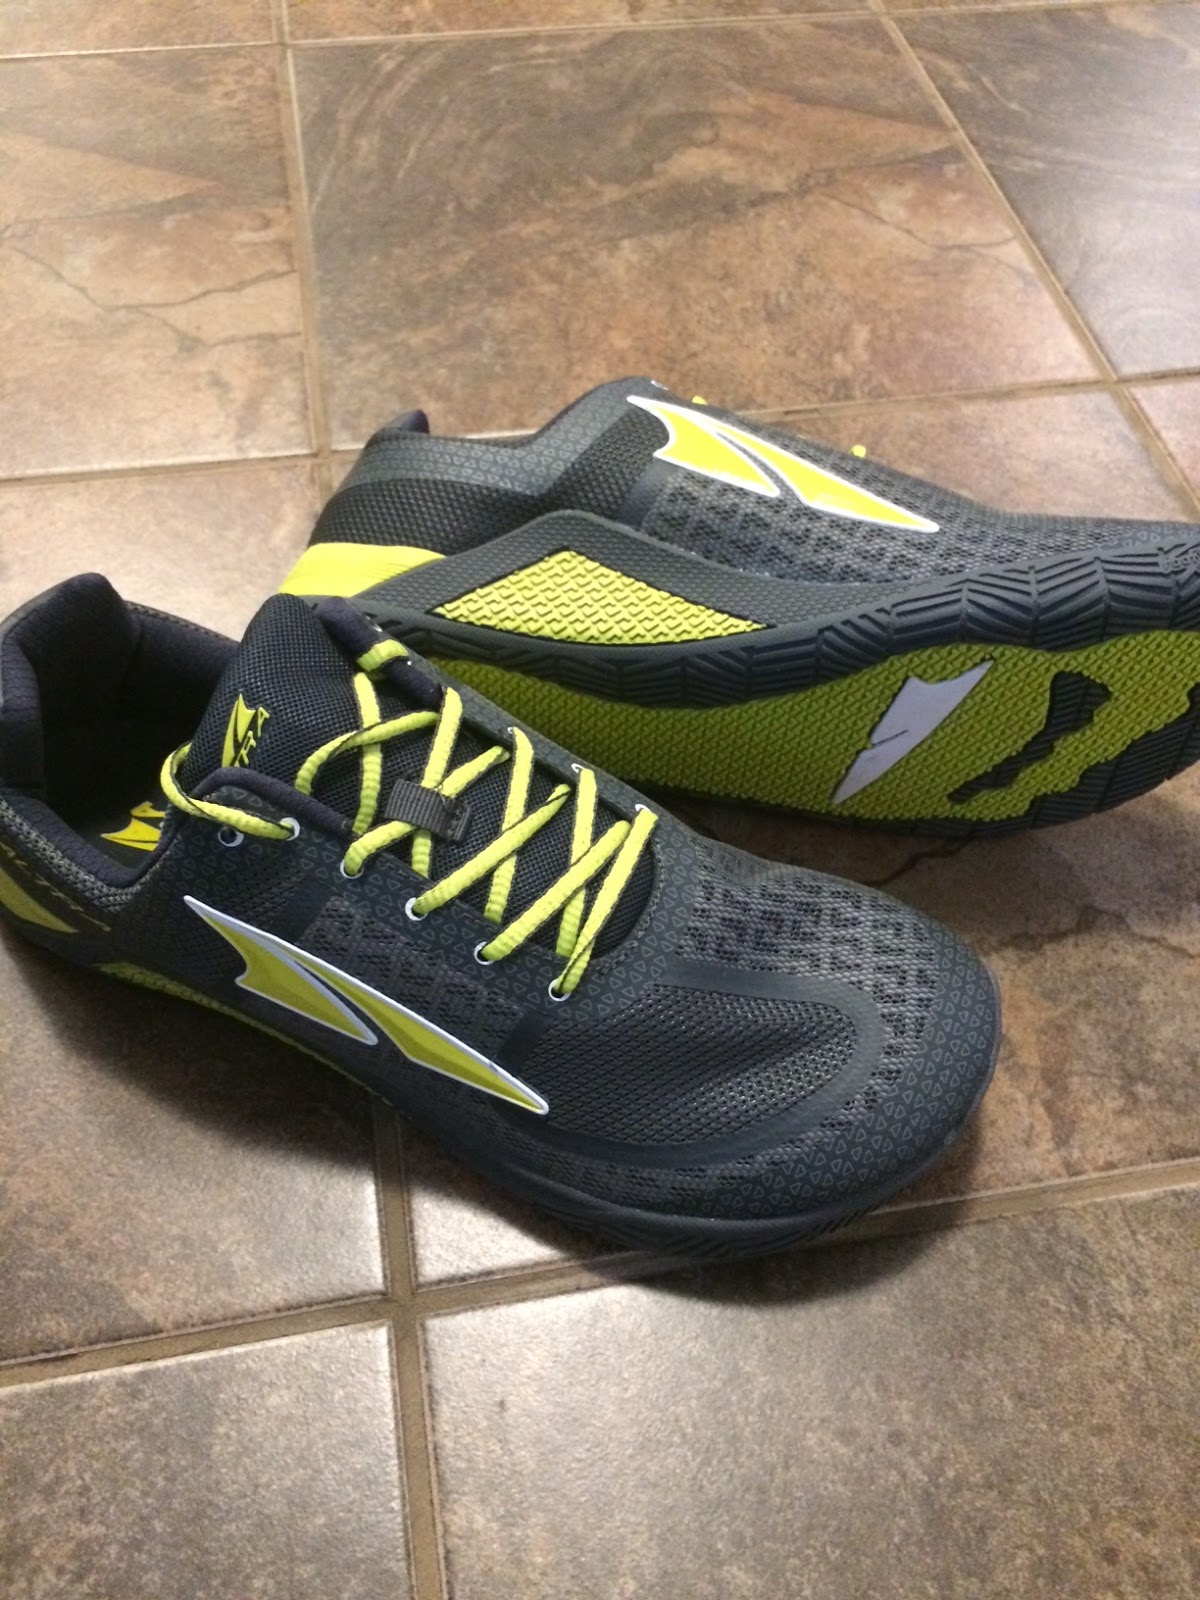 Thermopylae OCR: ALTRA Running - HIIT Shoe Review - July 2017